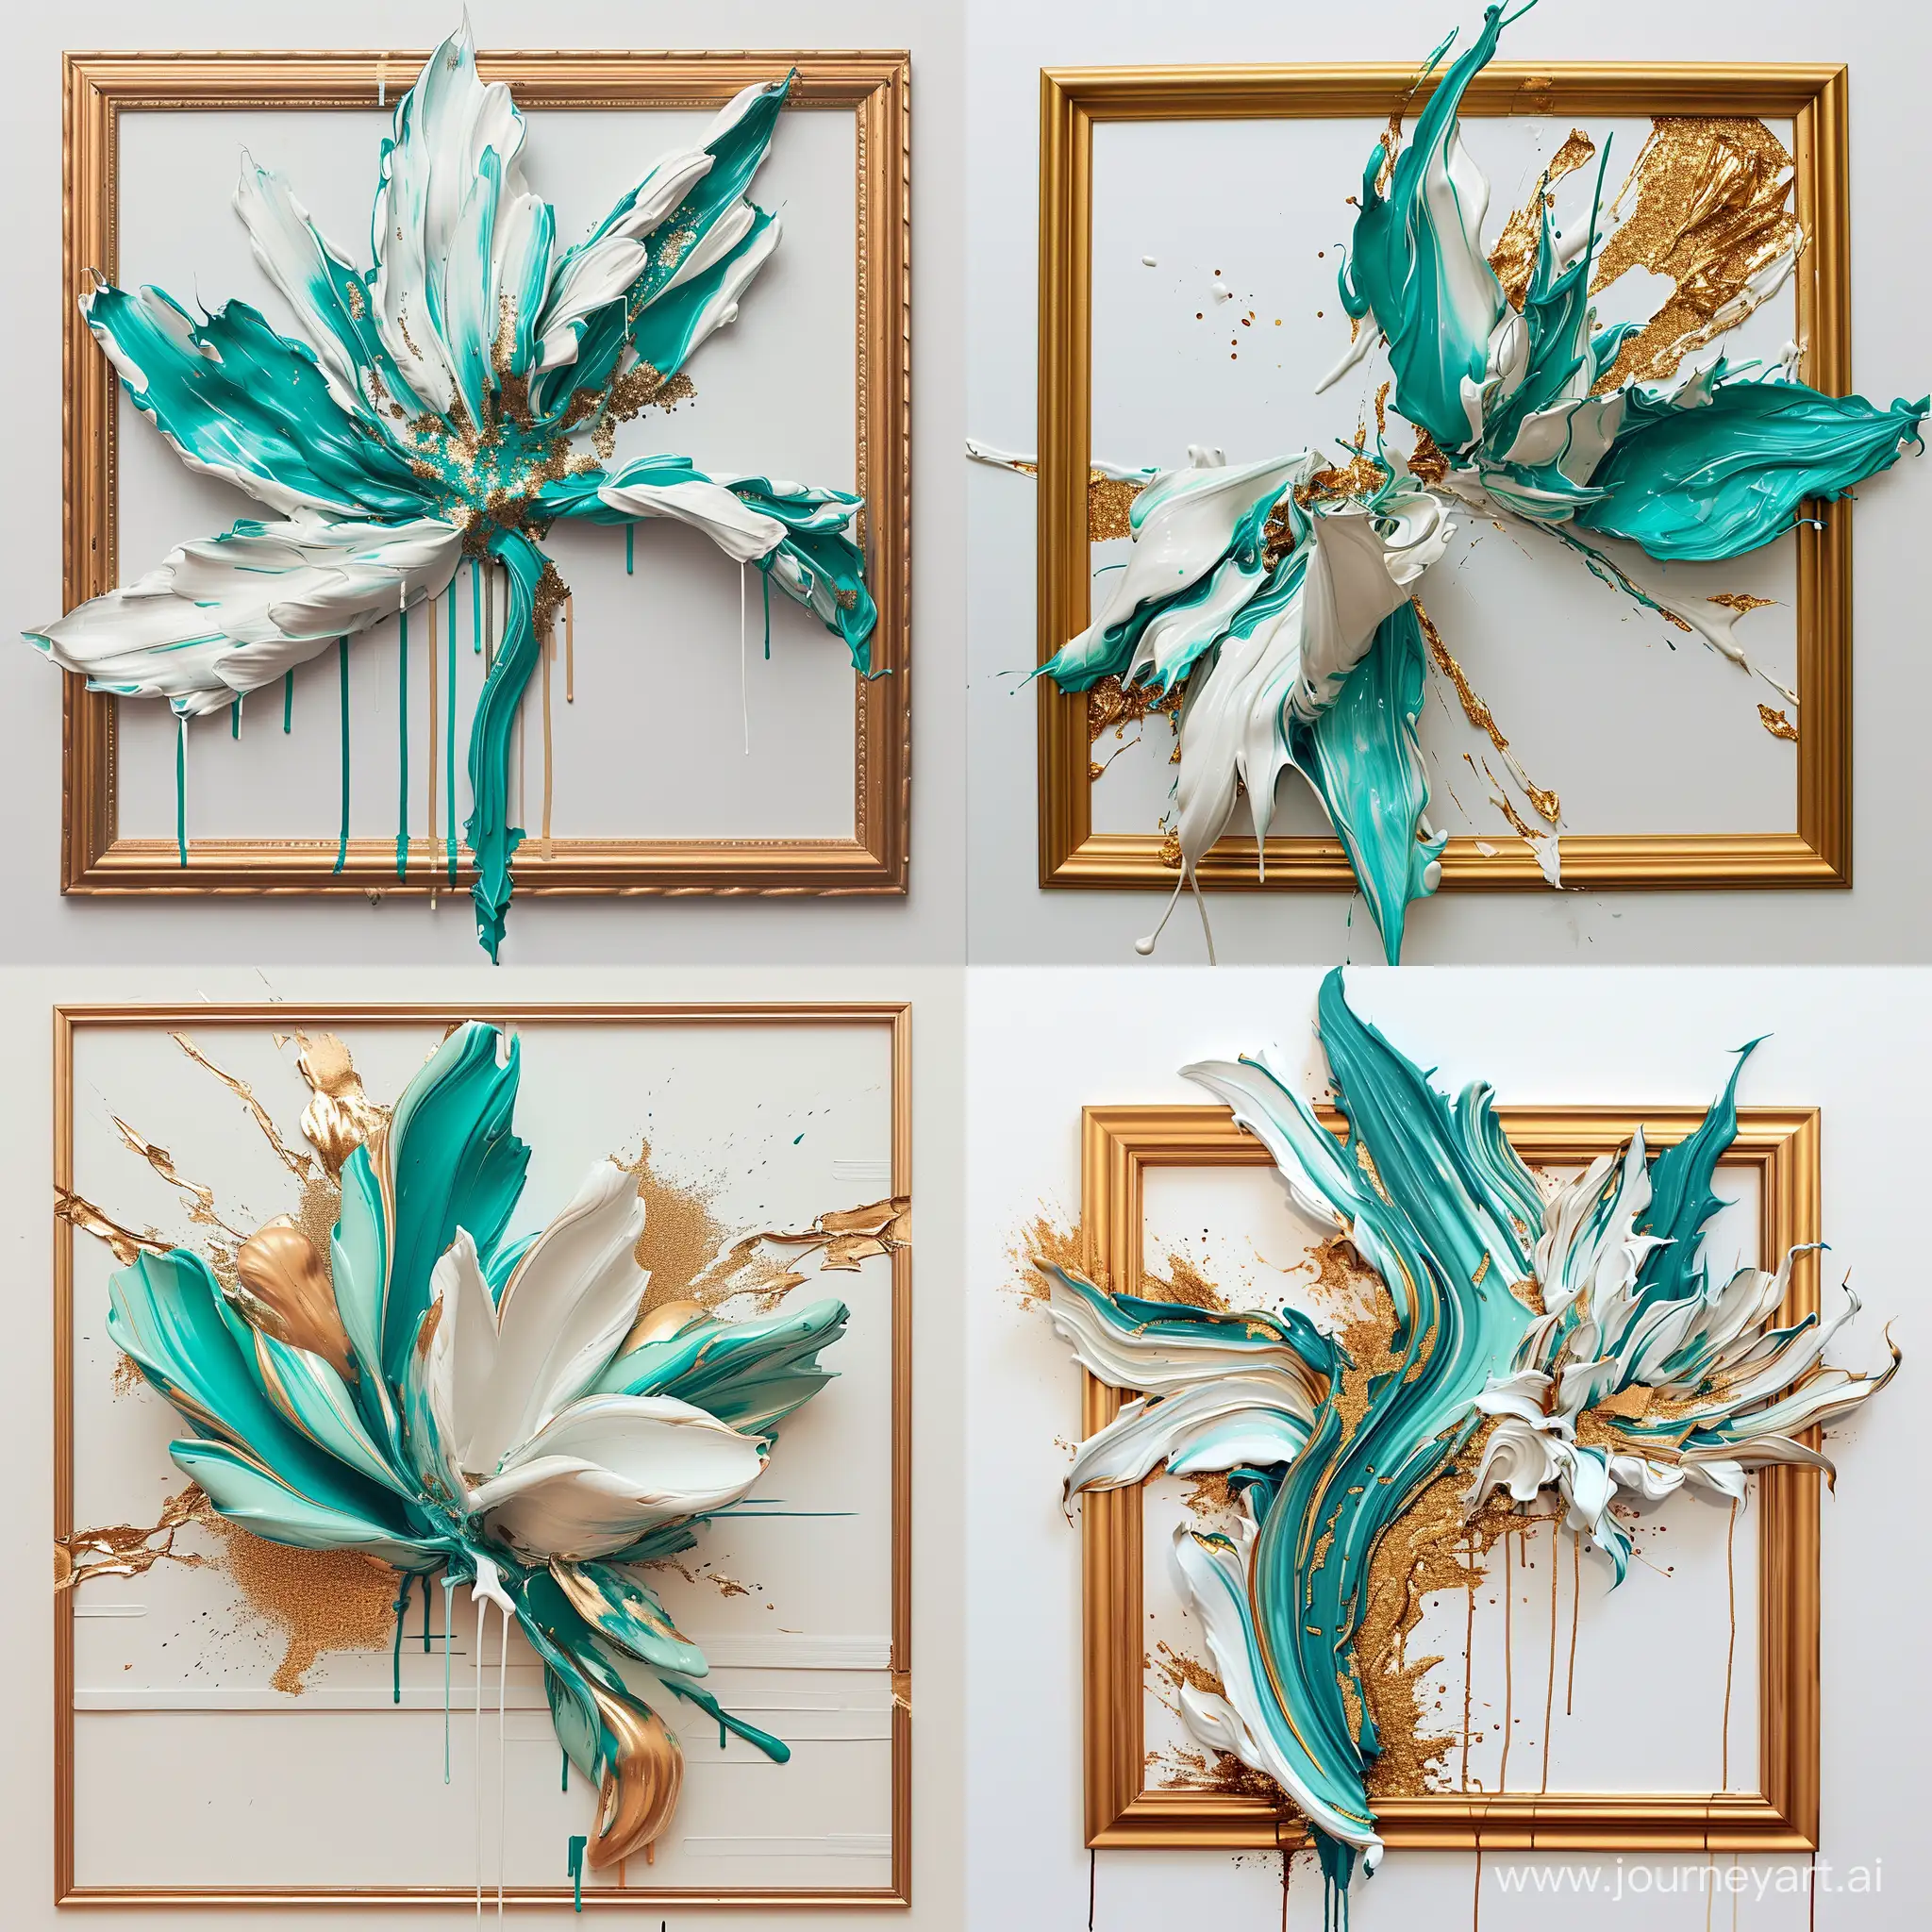 Surreal  leaves made of oil paint Dripping Paint flower by Peter Saville, it comes out at an angle from a golden frame, completely in the screen, abstract, large strokes, turquoise and white, gold sequins , stucco, 3d volume, unlimited flow of energy, abstract, multidimensional, in white background